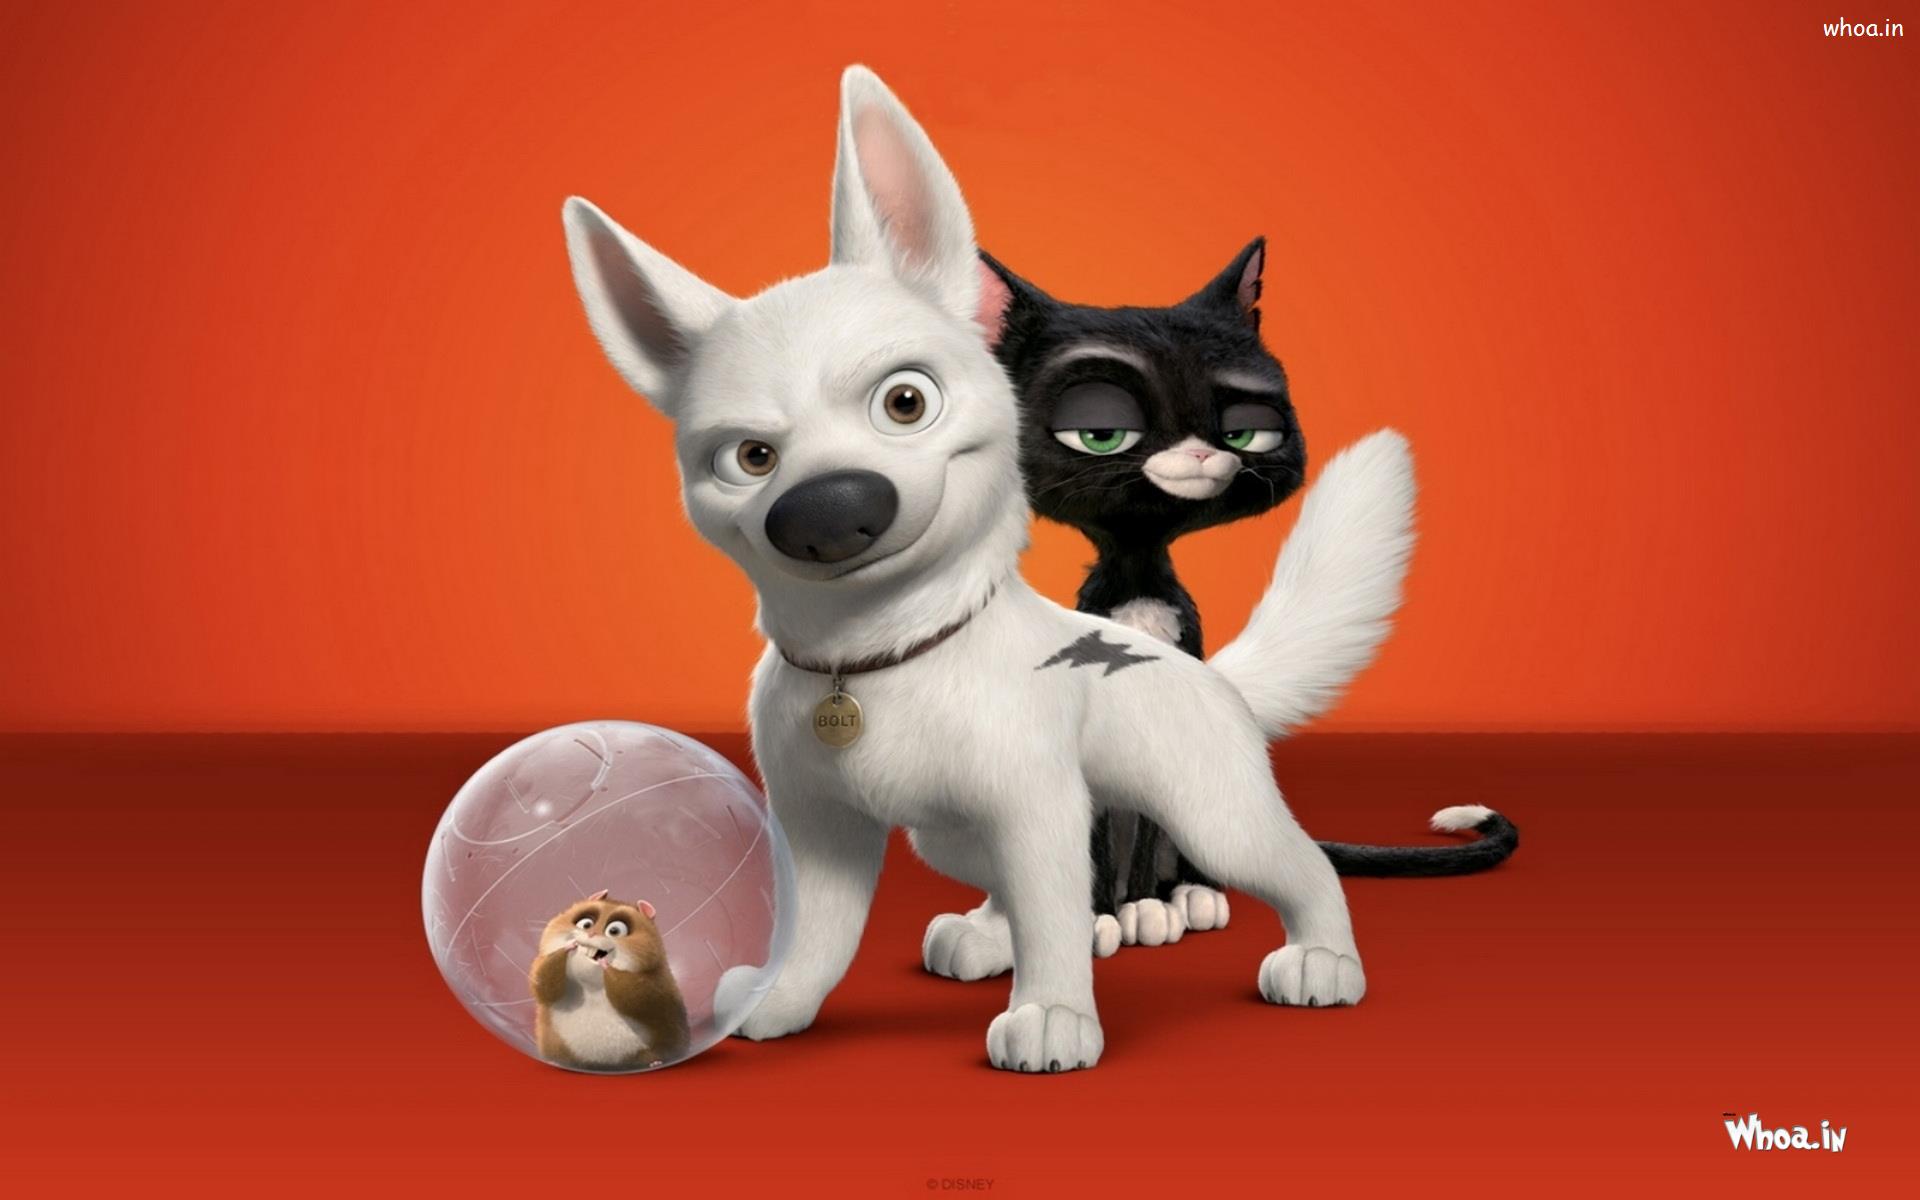 White Dog And Black Cat With Orange Background Animated Wallpaper